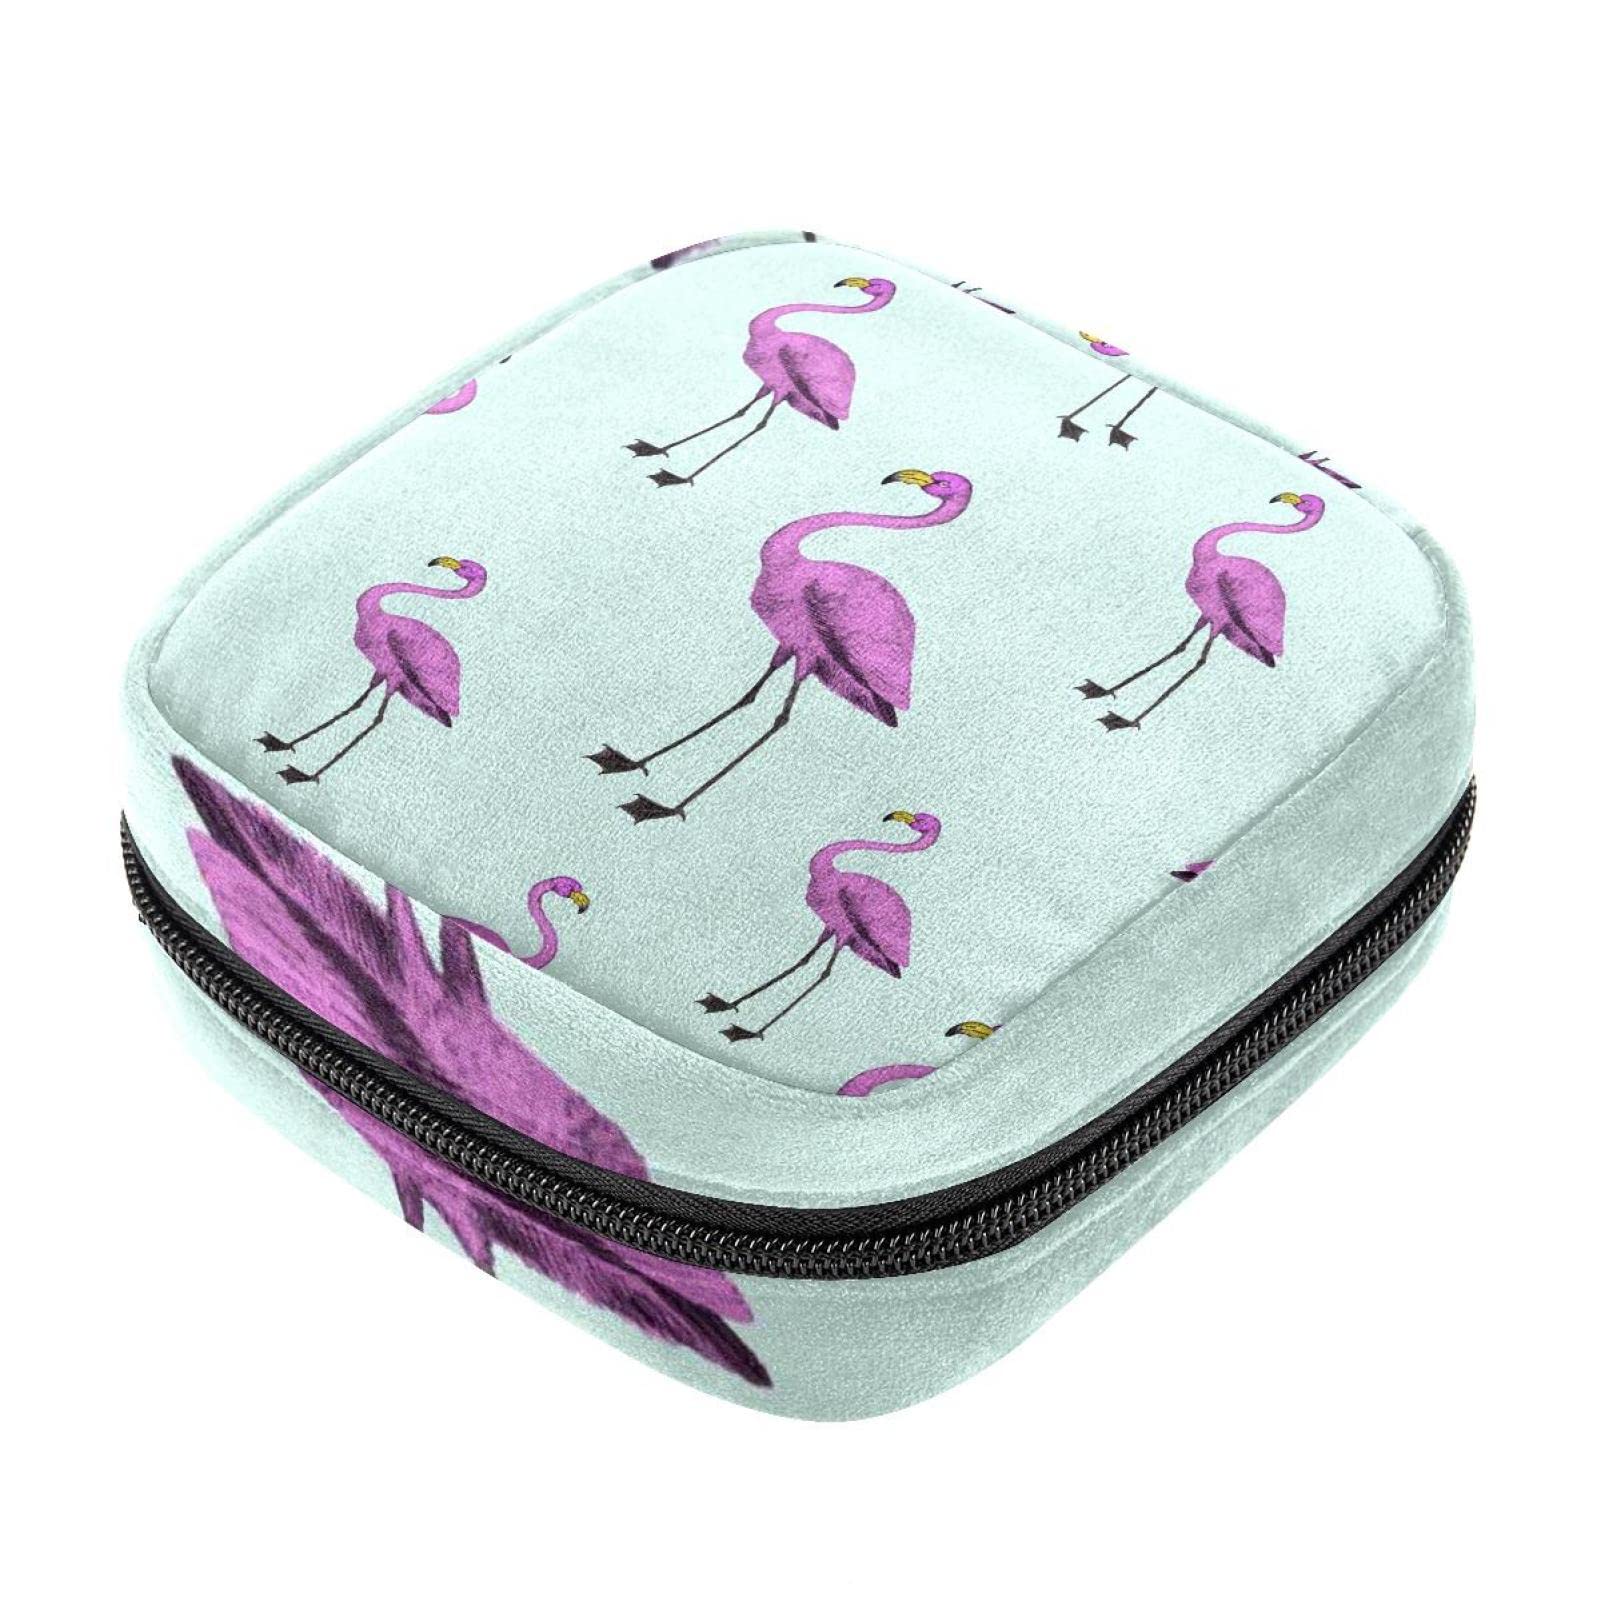 Period Pouch Portable Tampon Storage Bag,Tampon Holder for Purse Feminine  Product Organizer,Flamingo